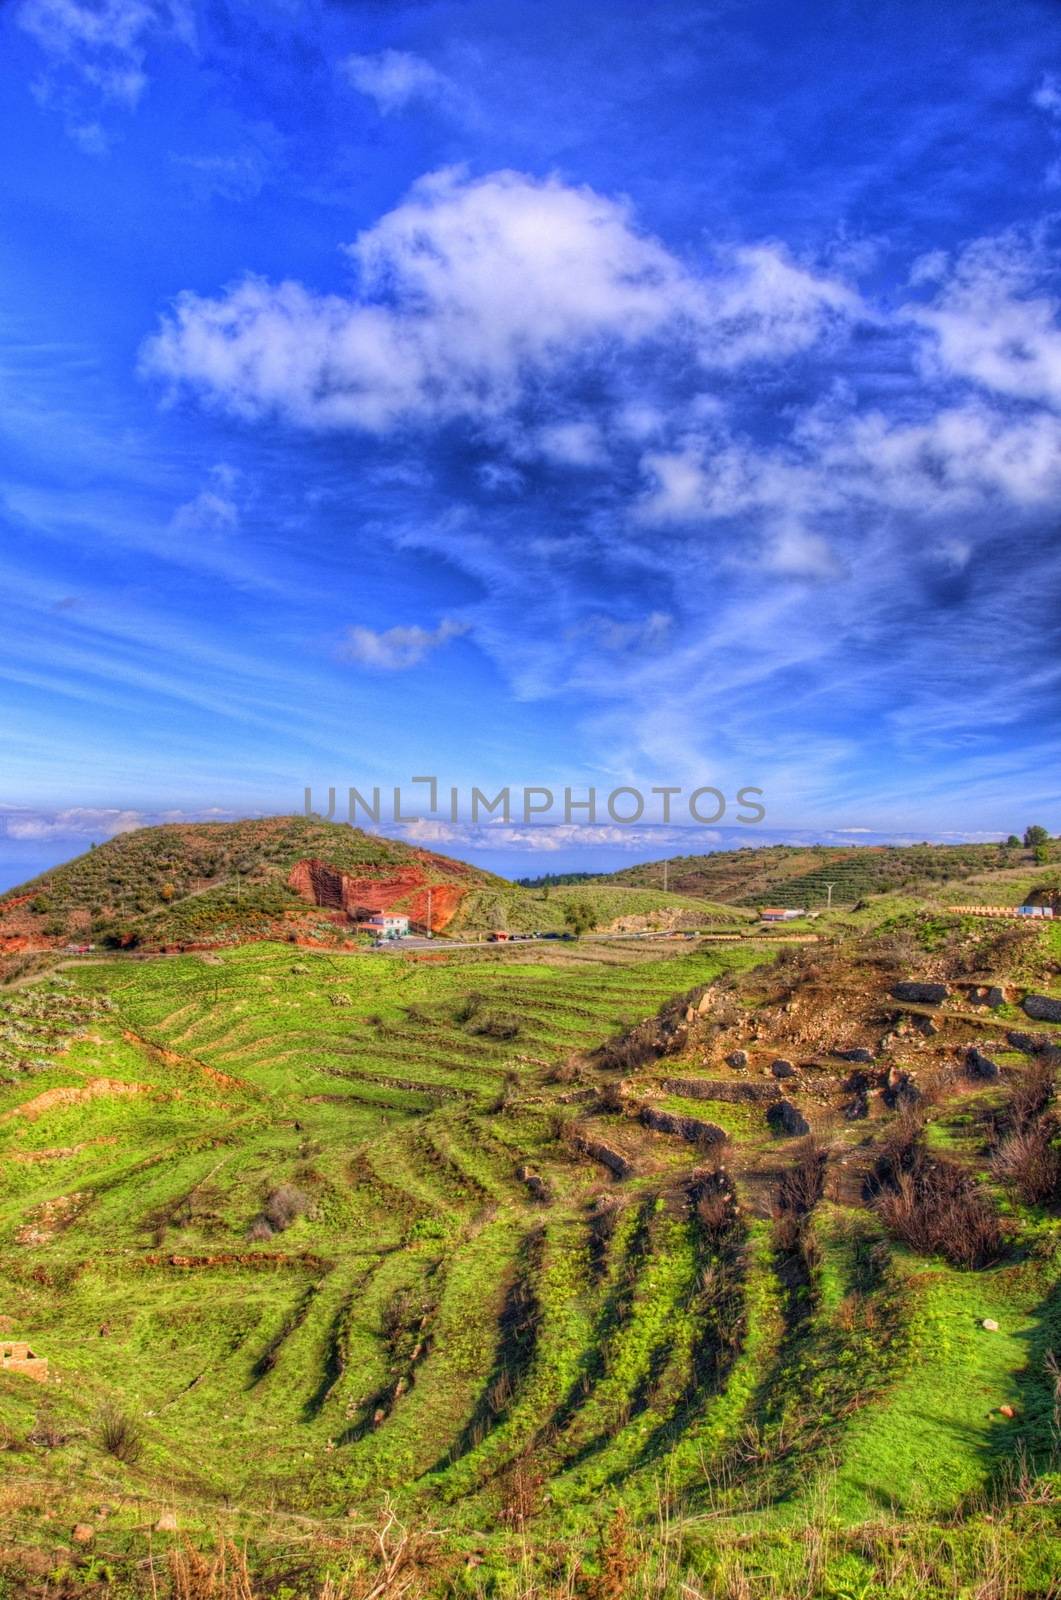 North-west coast of Tenerife mountains and green grass with blue sky with clouds, Canarian Islands by Eagle2308